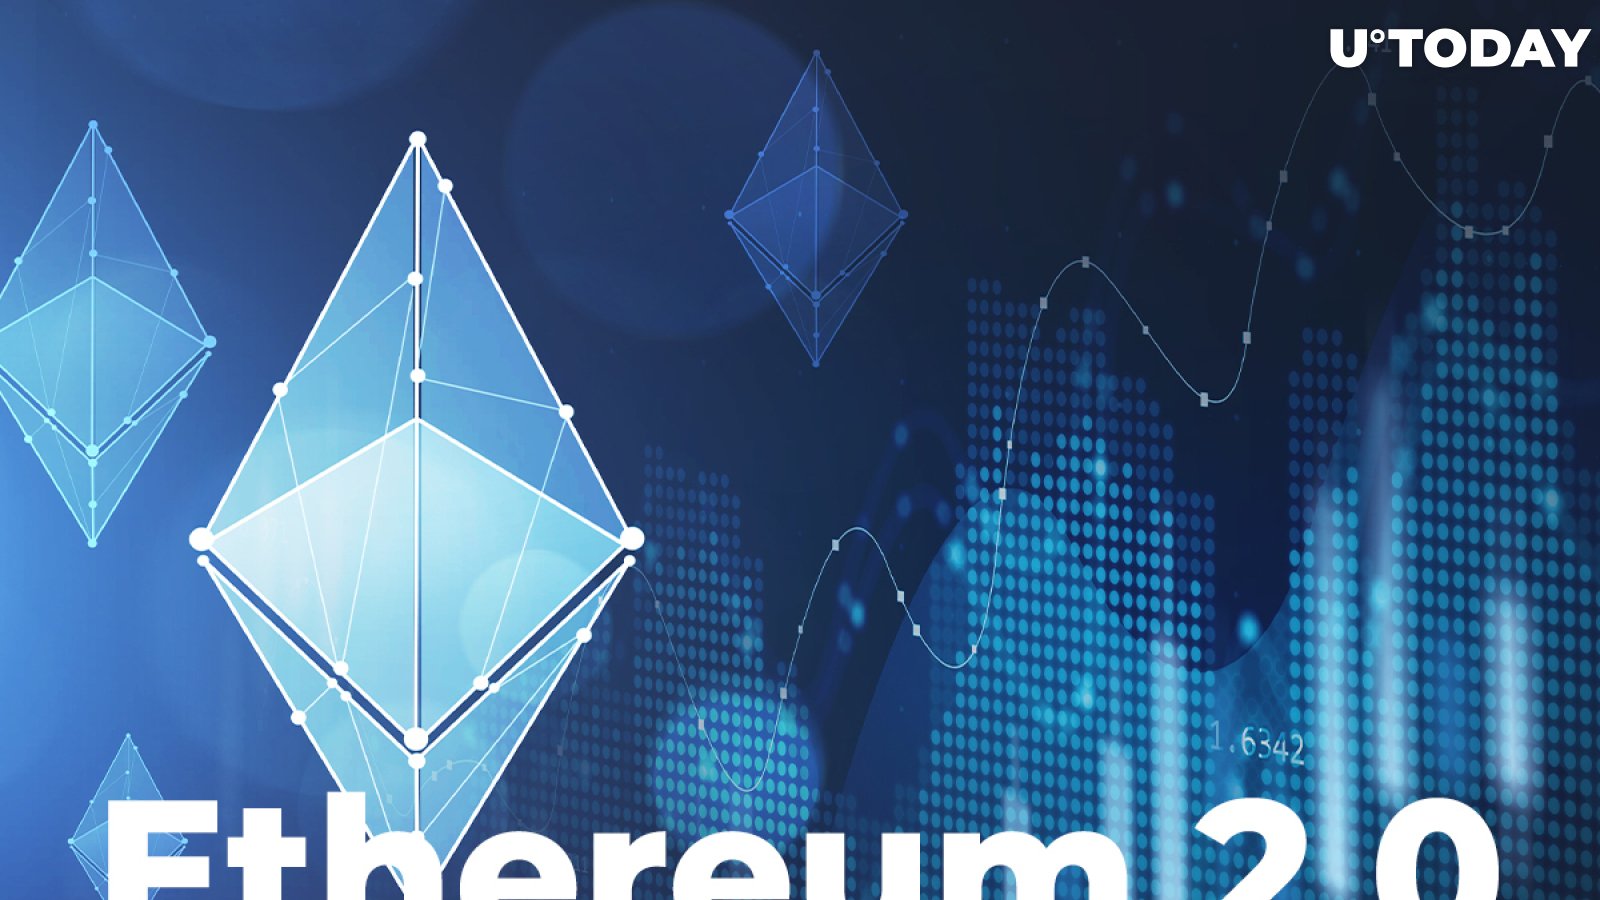 Ethereum 2.0 Next Steps to Mainnet Shared by Ethereum Foundation